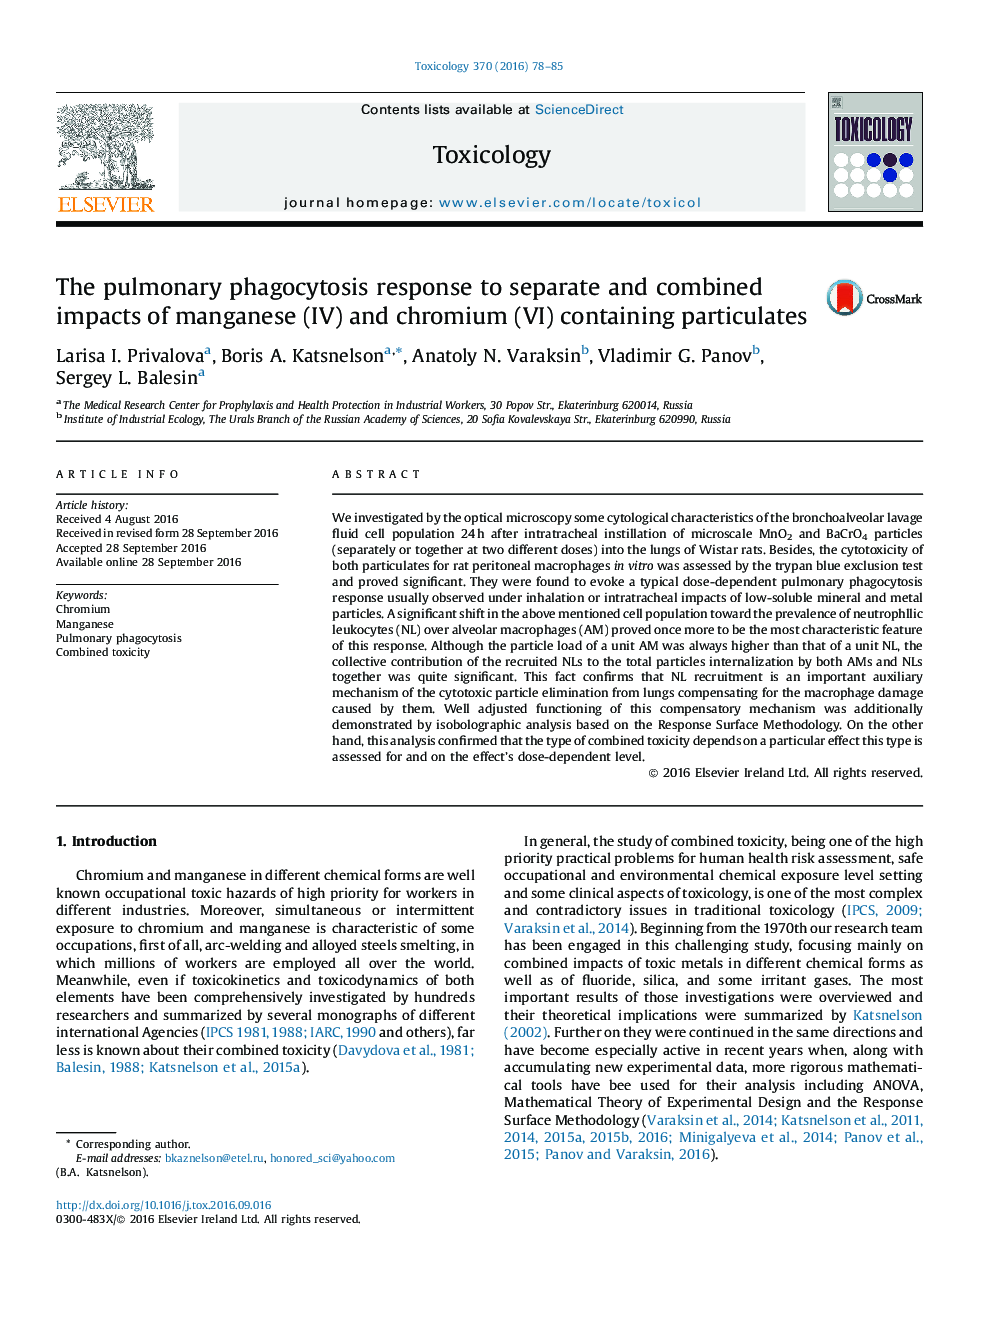 The pulmonary phagocytosis response to separate and combined impacts of manganese (IV) and chromium (VI) containing particulates